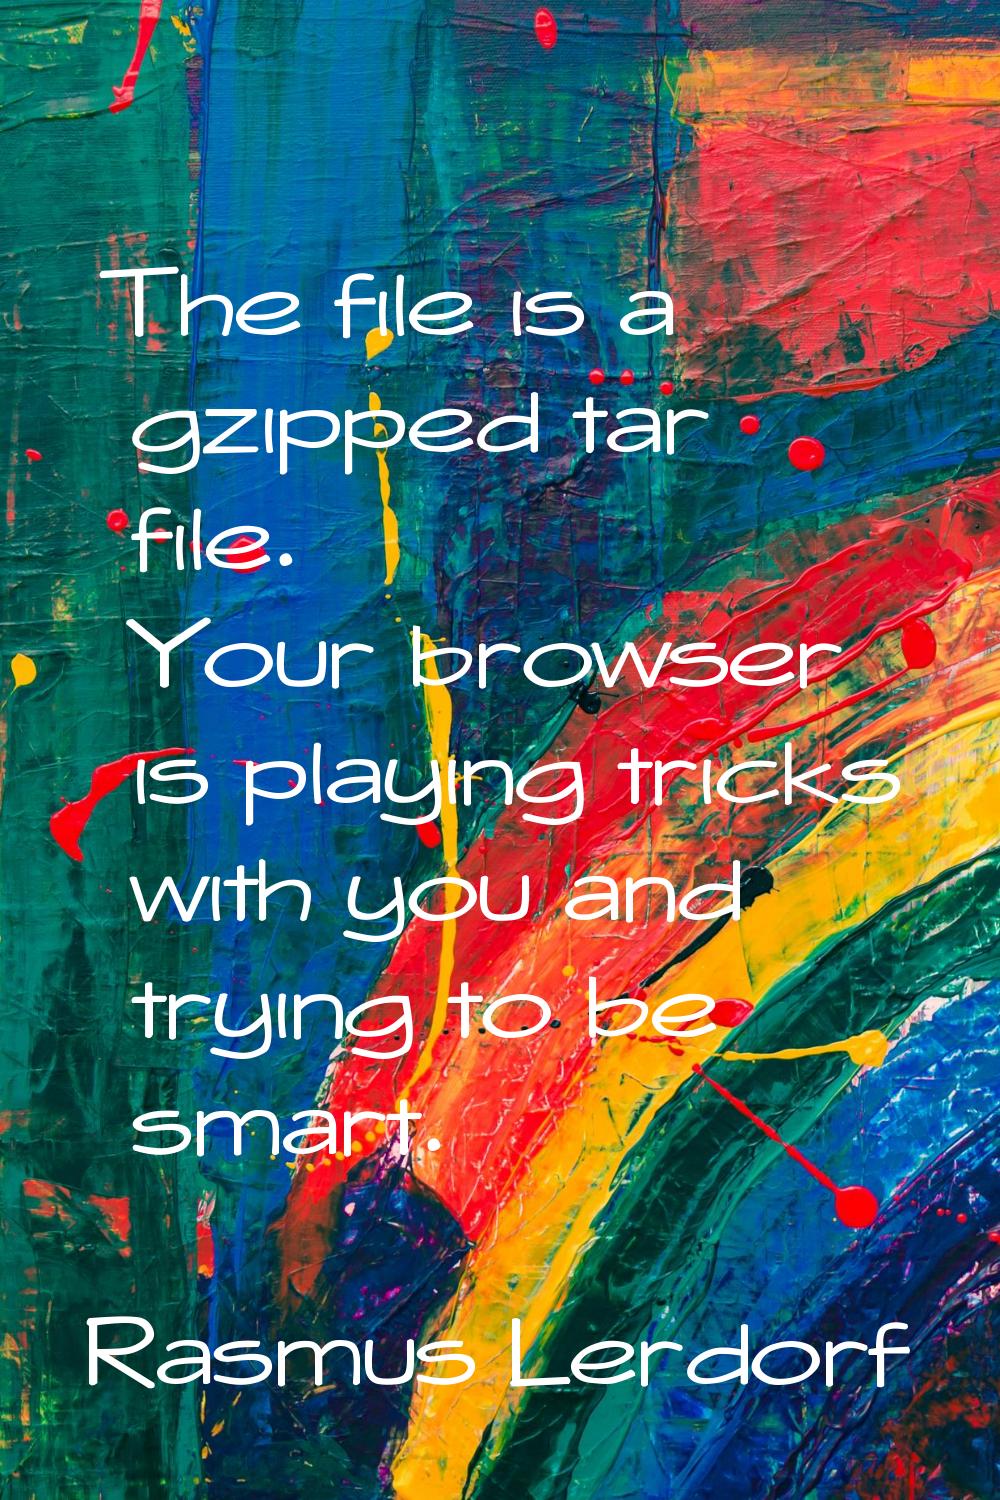 The file is a gzipped tar file. Your browser is playing tricks with you and trying to be smart.